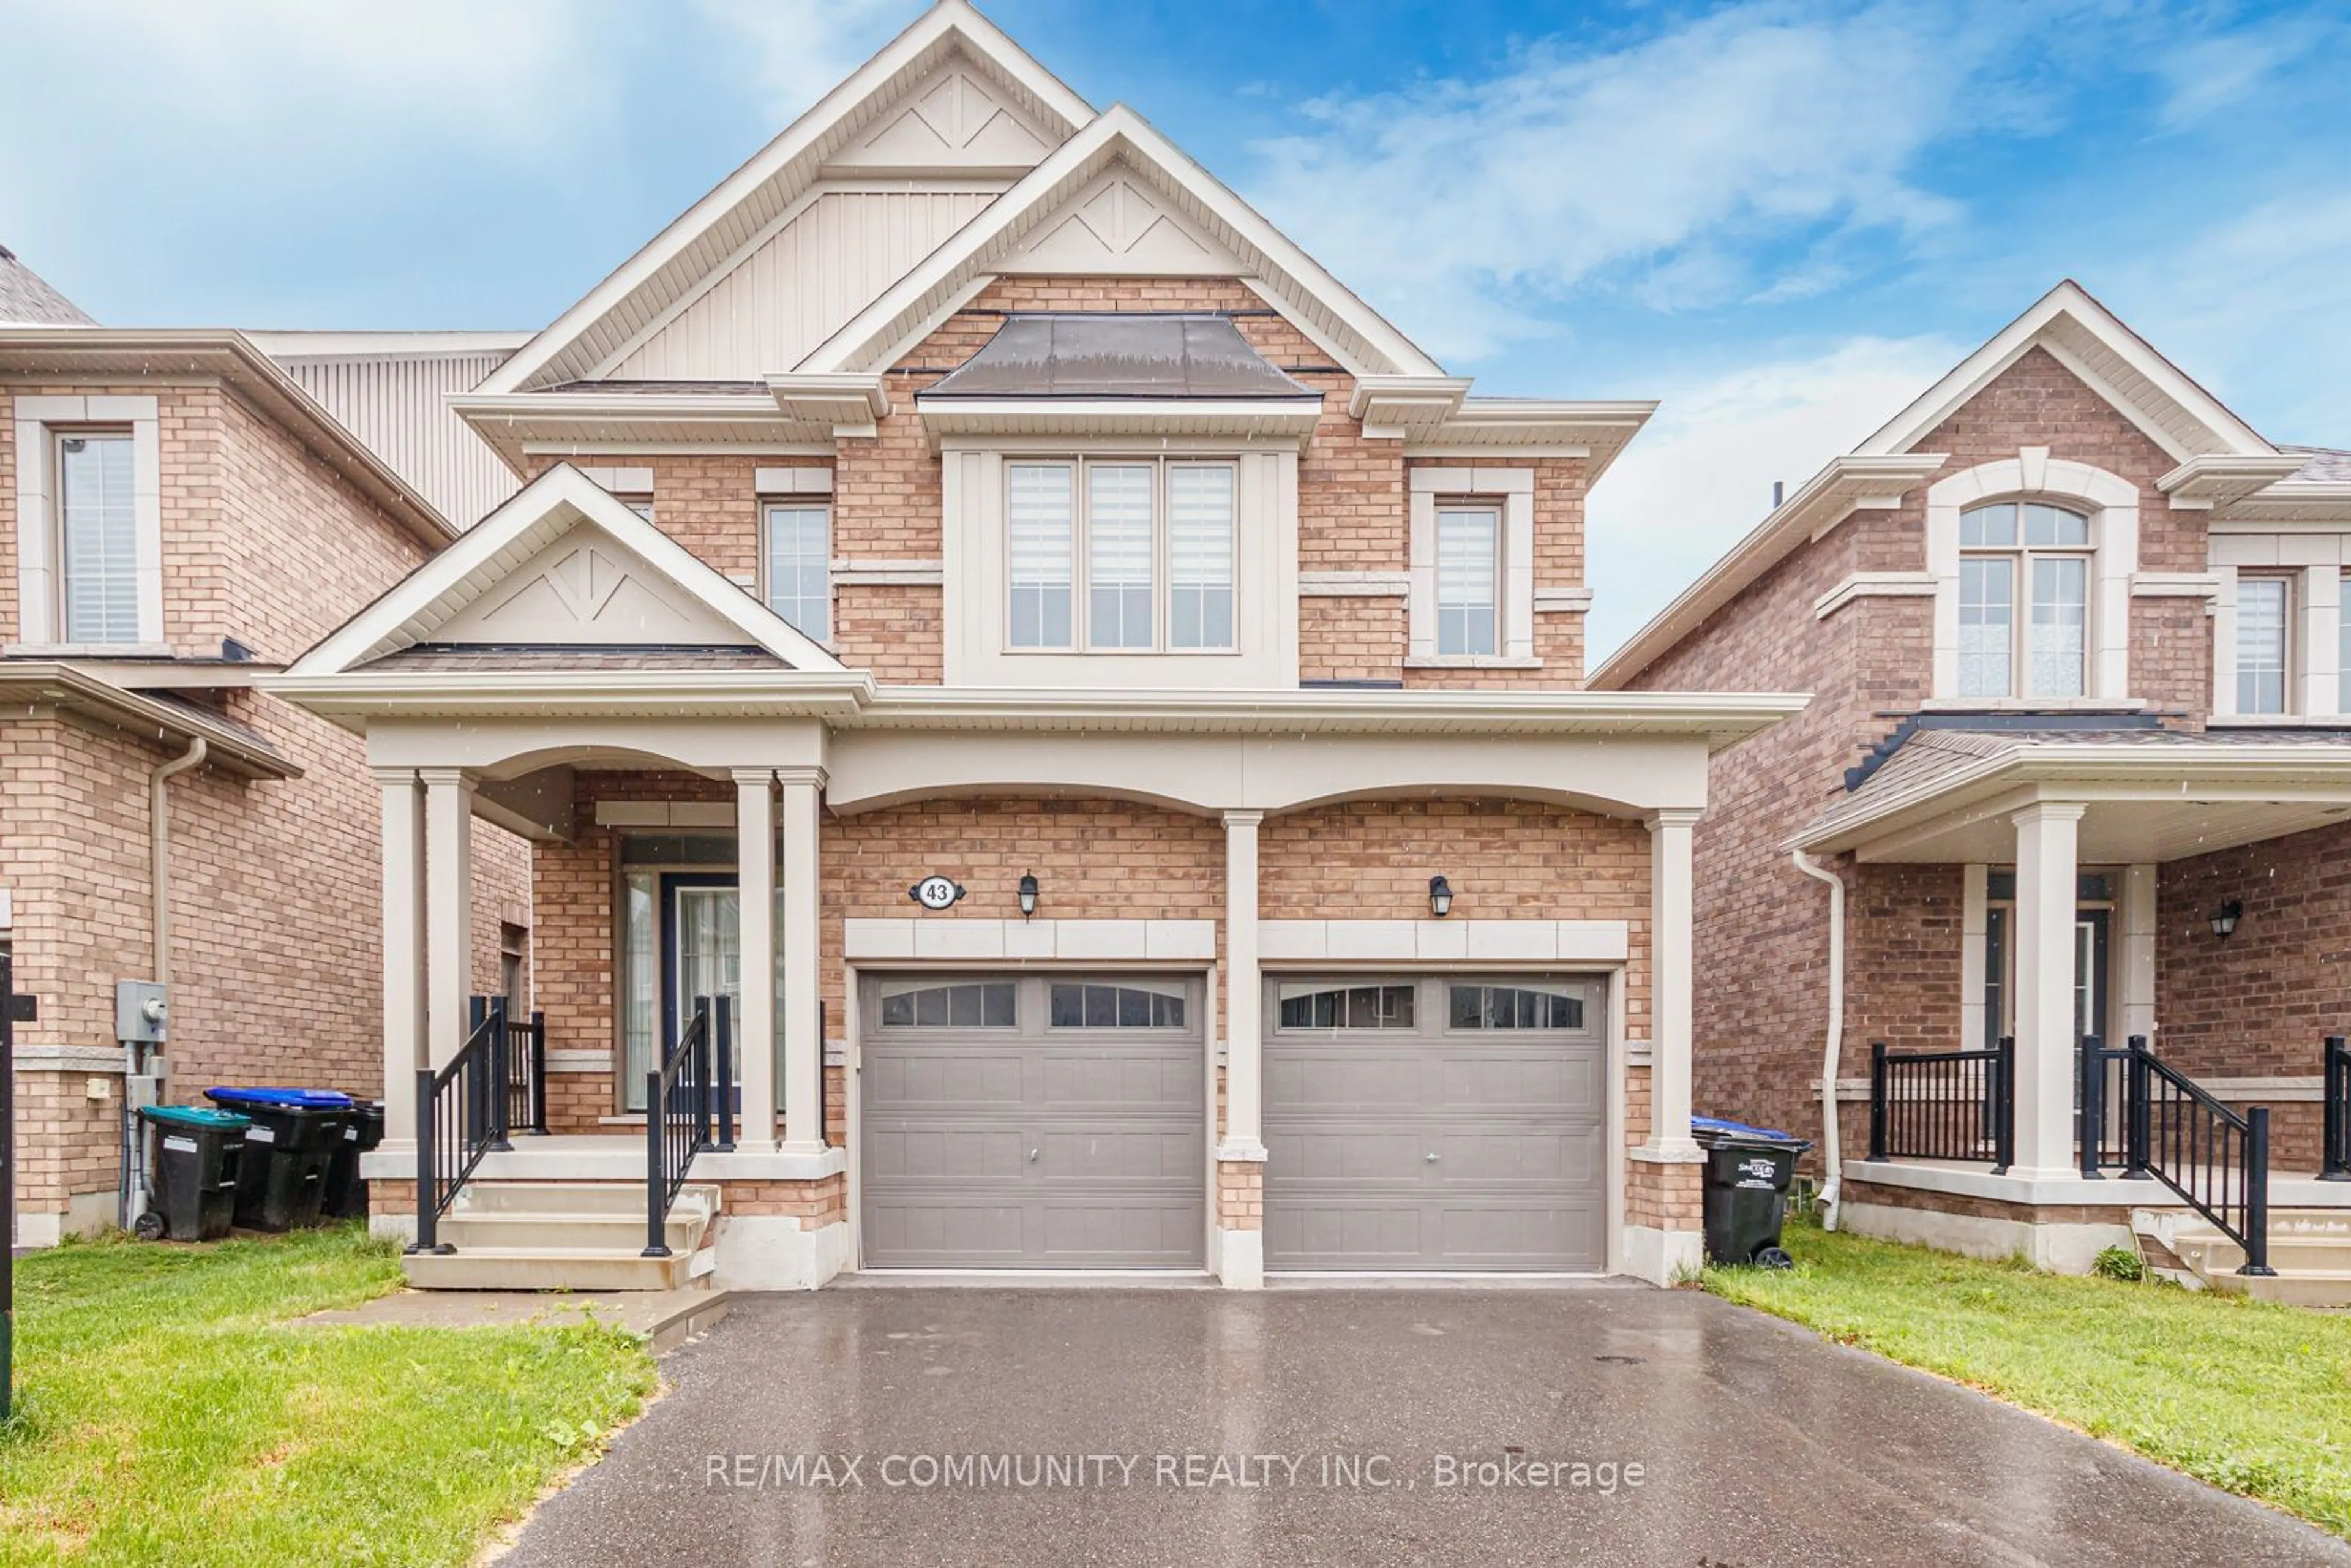 Home with brick exterior material for 43 Portland St, Collingwood Ontario L9Y 3Z6